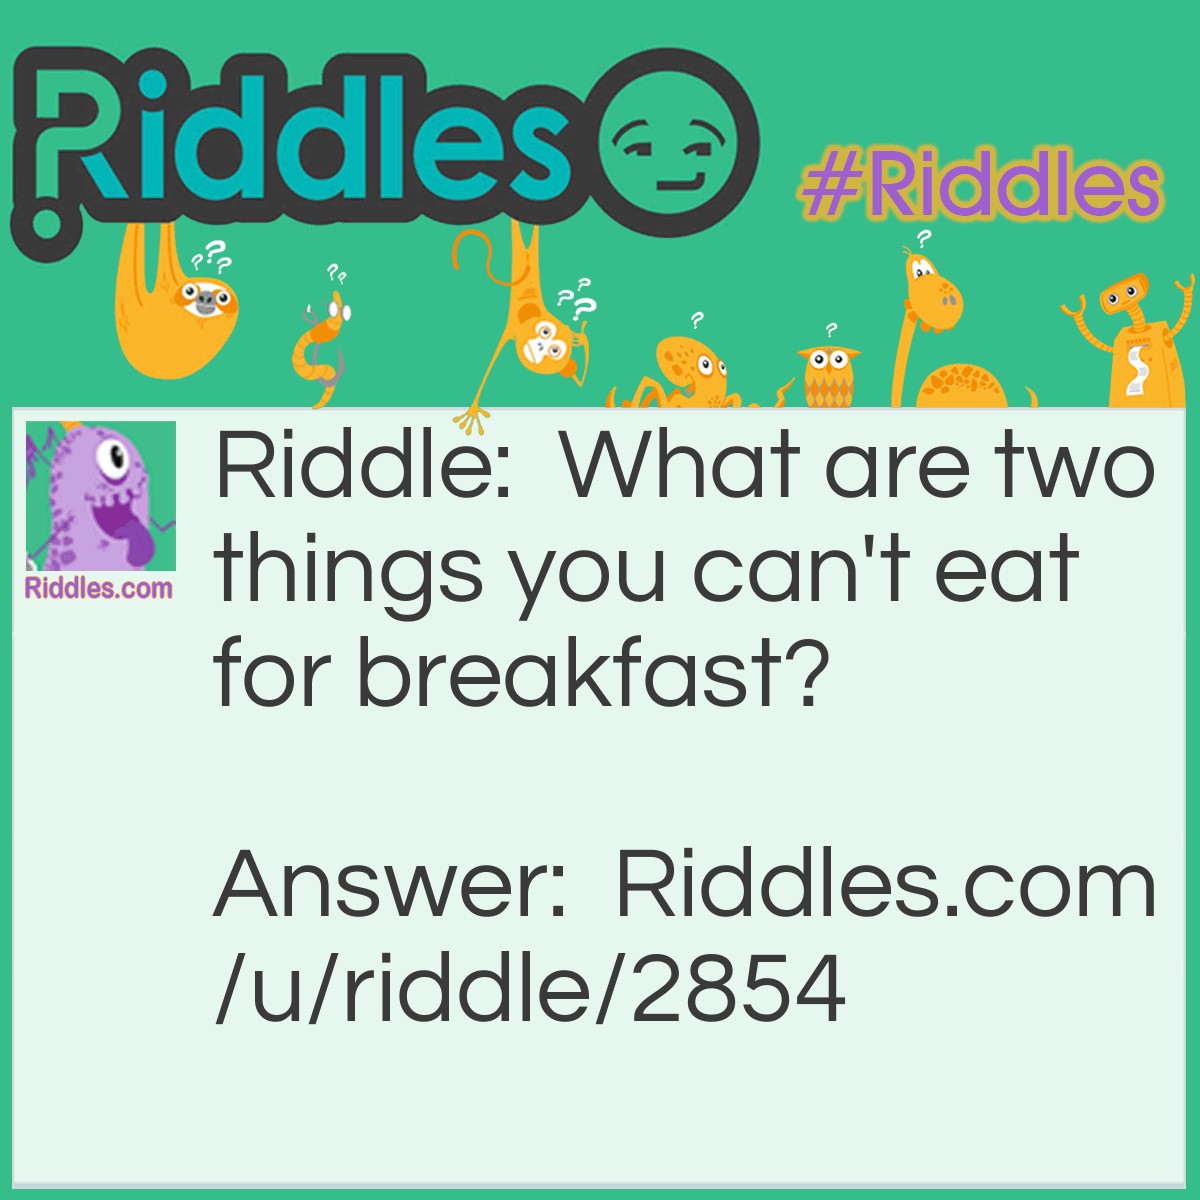 Riddle: What are two things you can't eat for breakfast? Answer: Lunch and dinner!